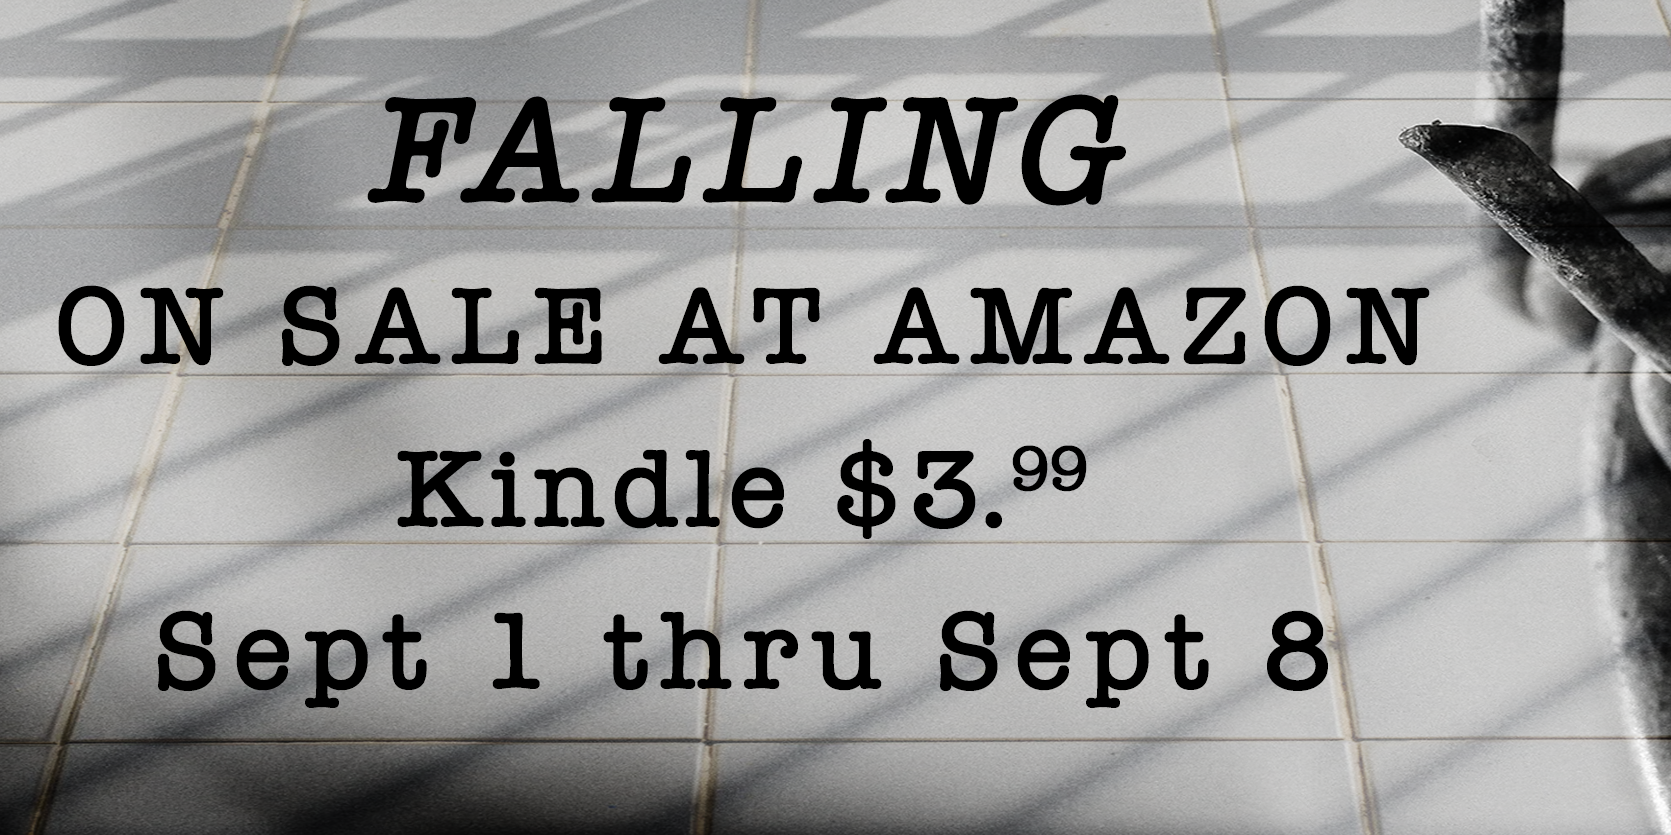 Kindle version of Falling on Sale from Sept 1 to Sept 8